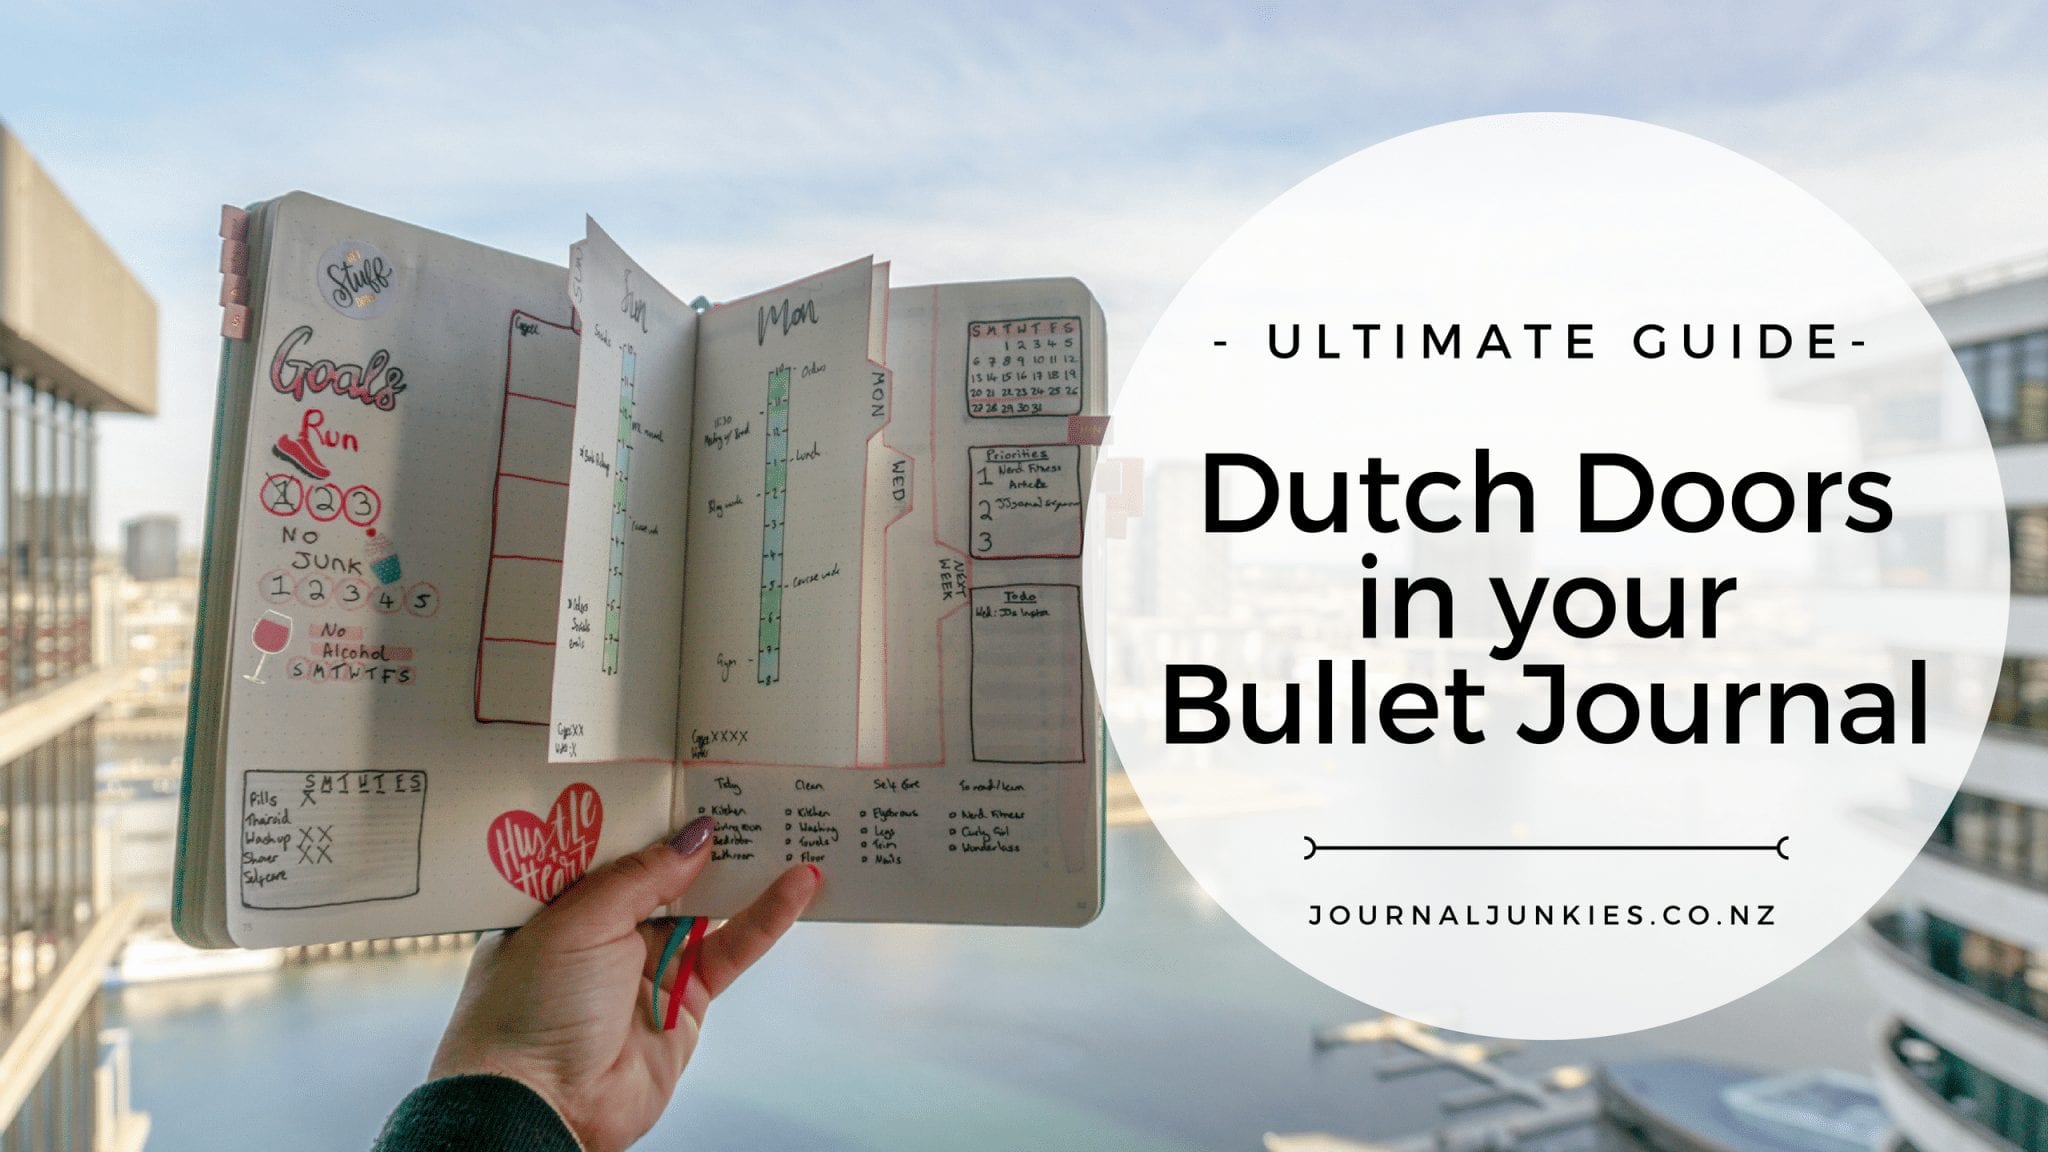 The Ultimate Guide to Dutch Door Bullet Journal Layouts